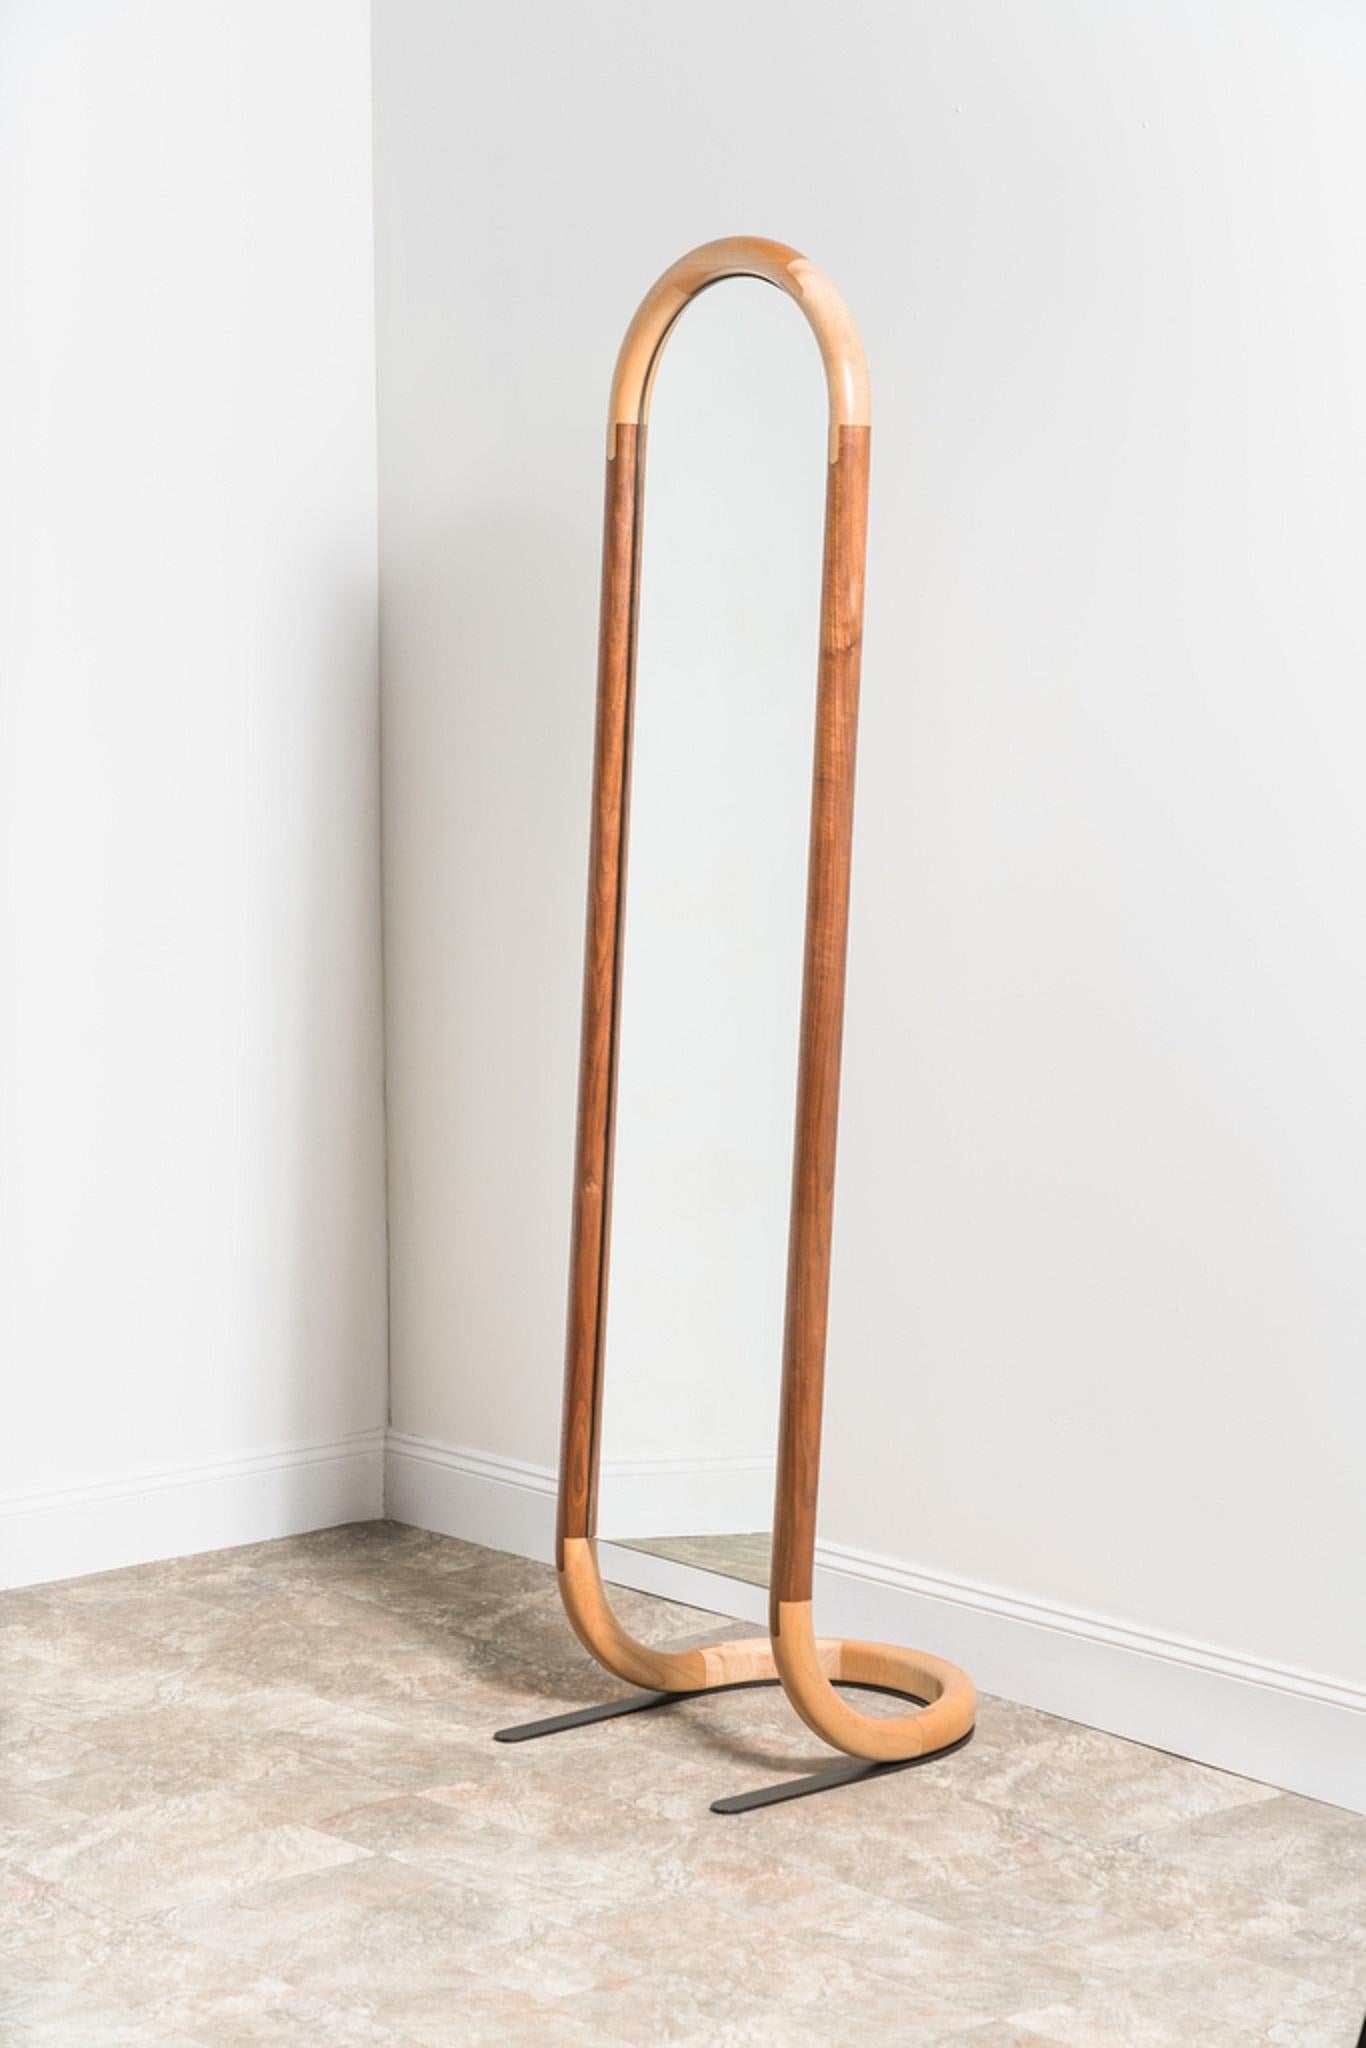 The design of the standing halo mirror relishes in the beauty of joinery. Contrasting wood species emphasize the connections between frame members and the downward arching profile of the mirror seems to mark out the pull of gravity. 

This mirror is